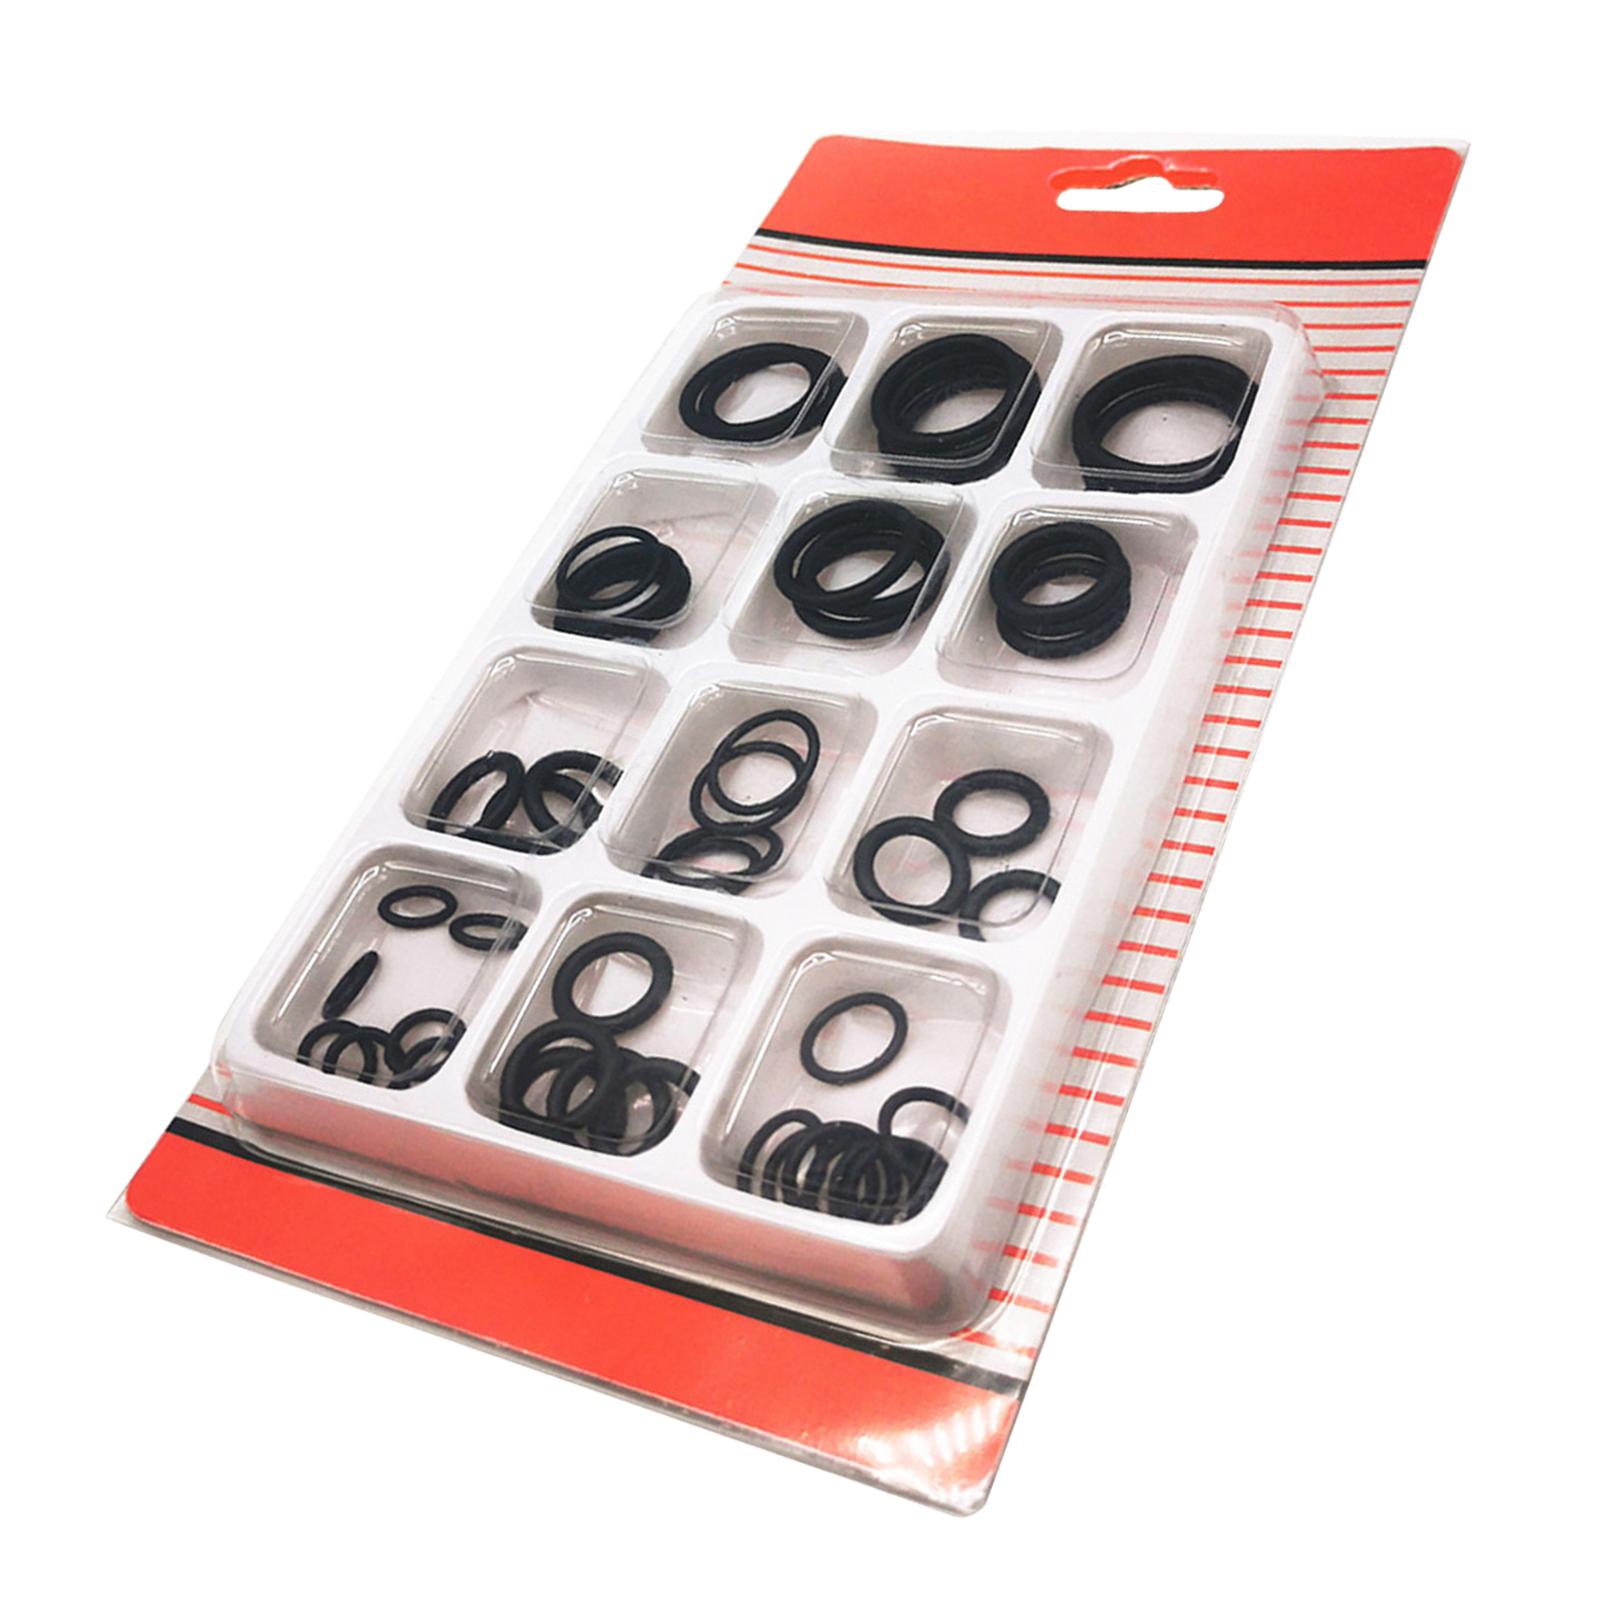 50x Universal Rubber O Rings Kit for Faucet Pipe Shower Head Connection